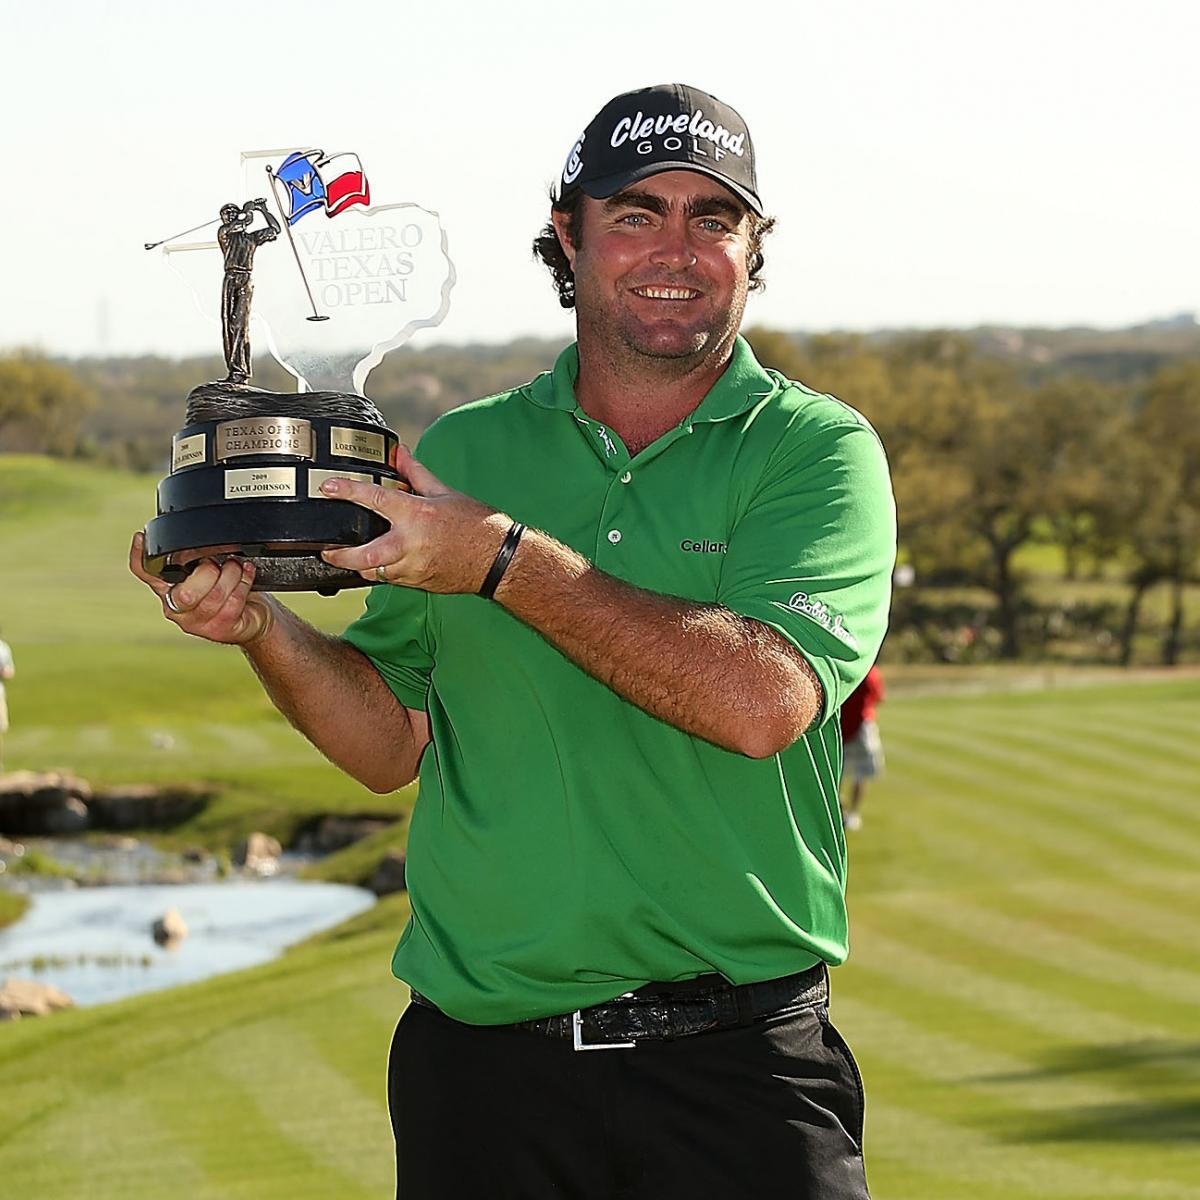 Valero Texas Open 2014 Daily Leaderboard Analysis, Highlights and More